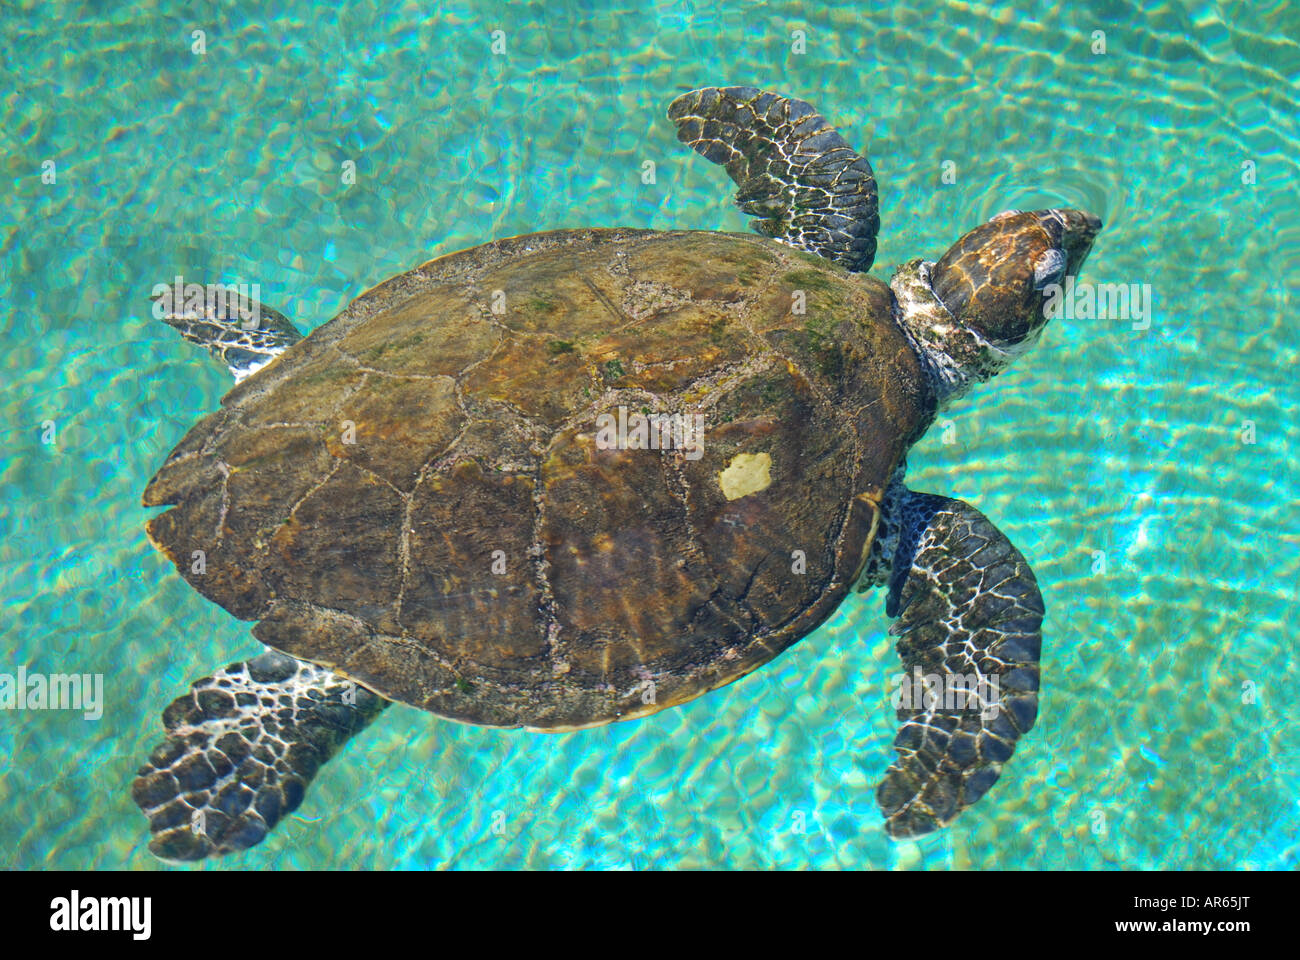 Green Turtle in pool, Coral World Underwater Observatory and Aquarium, Eilat, South District, Israel Stock Photo